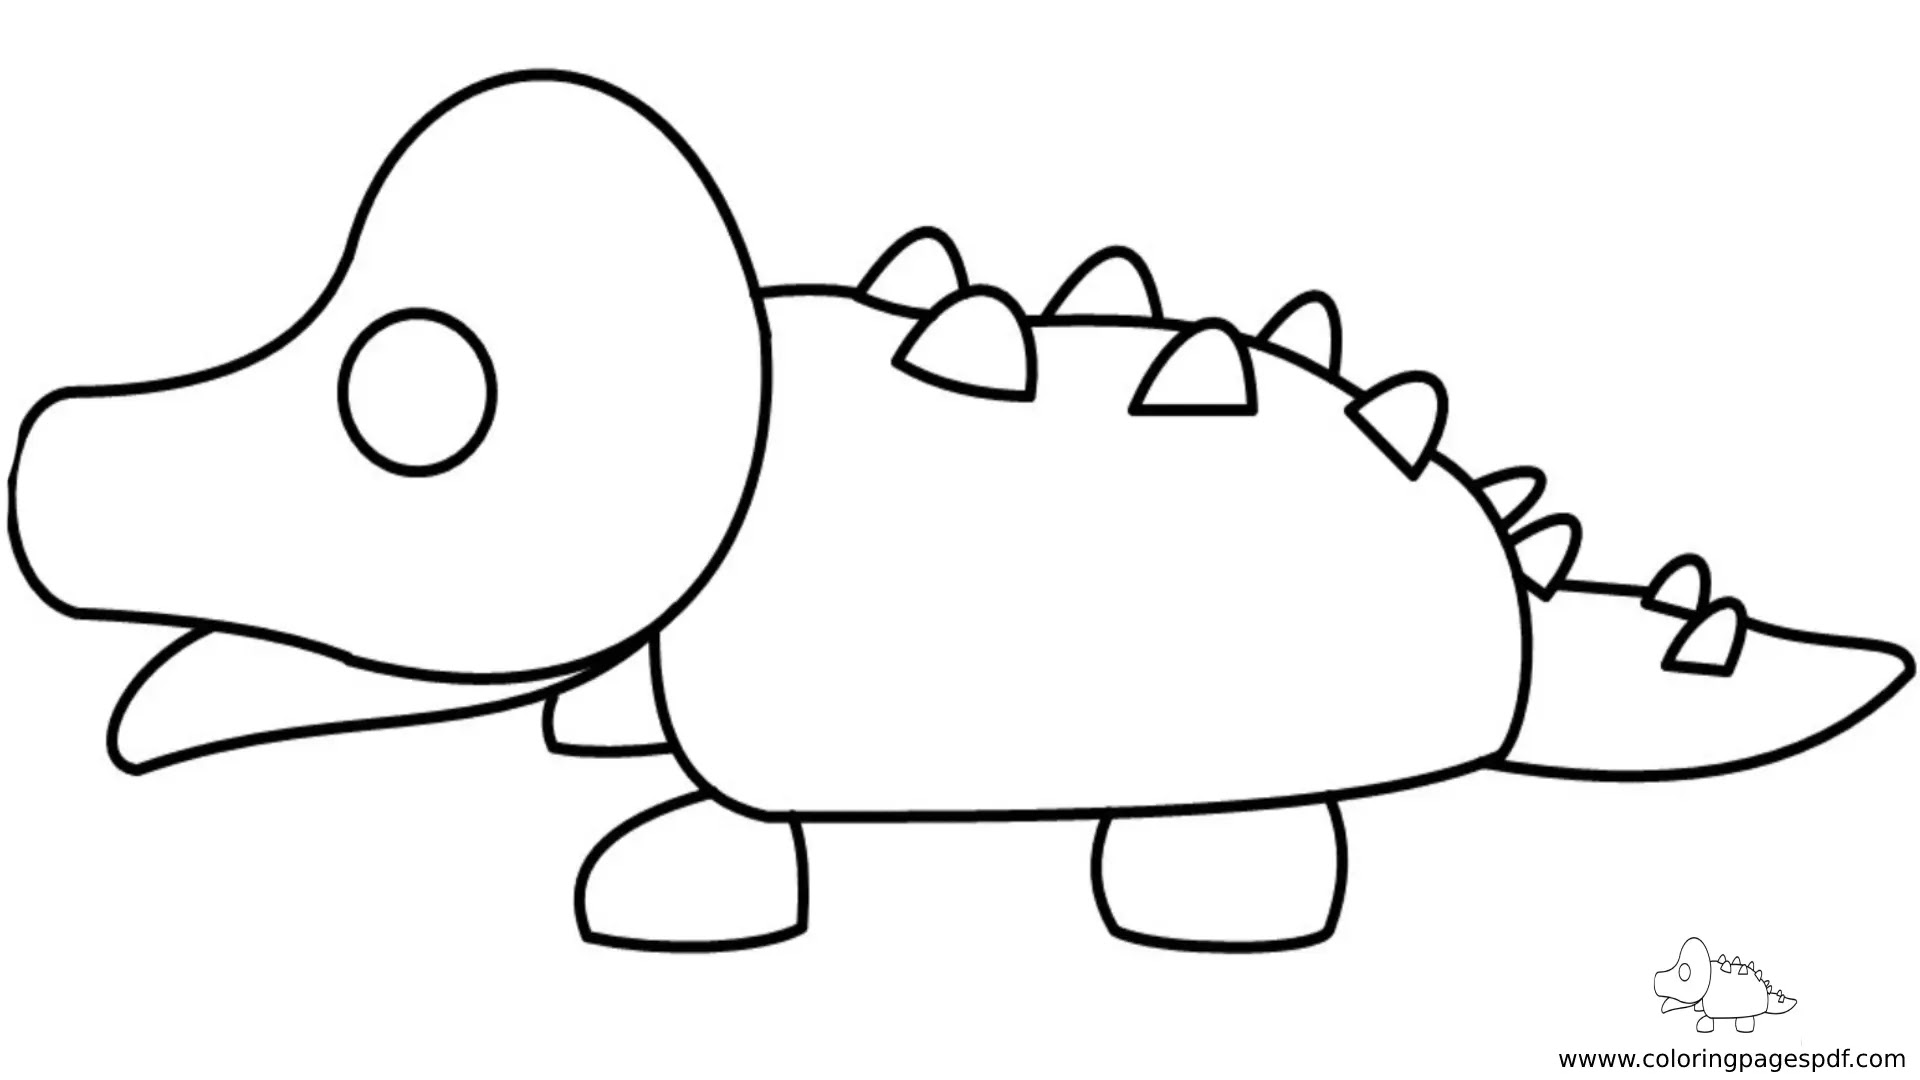 Adopt Me Alligator Coloring Pages